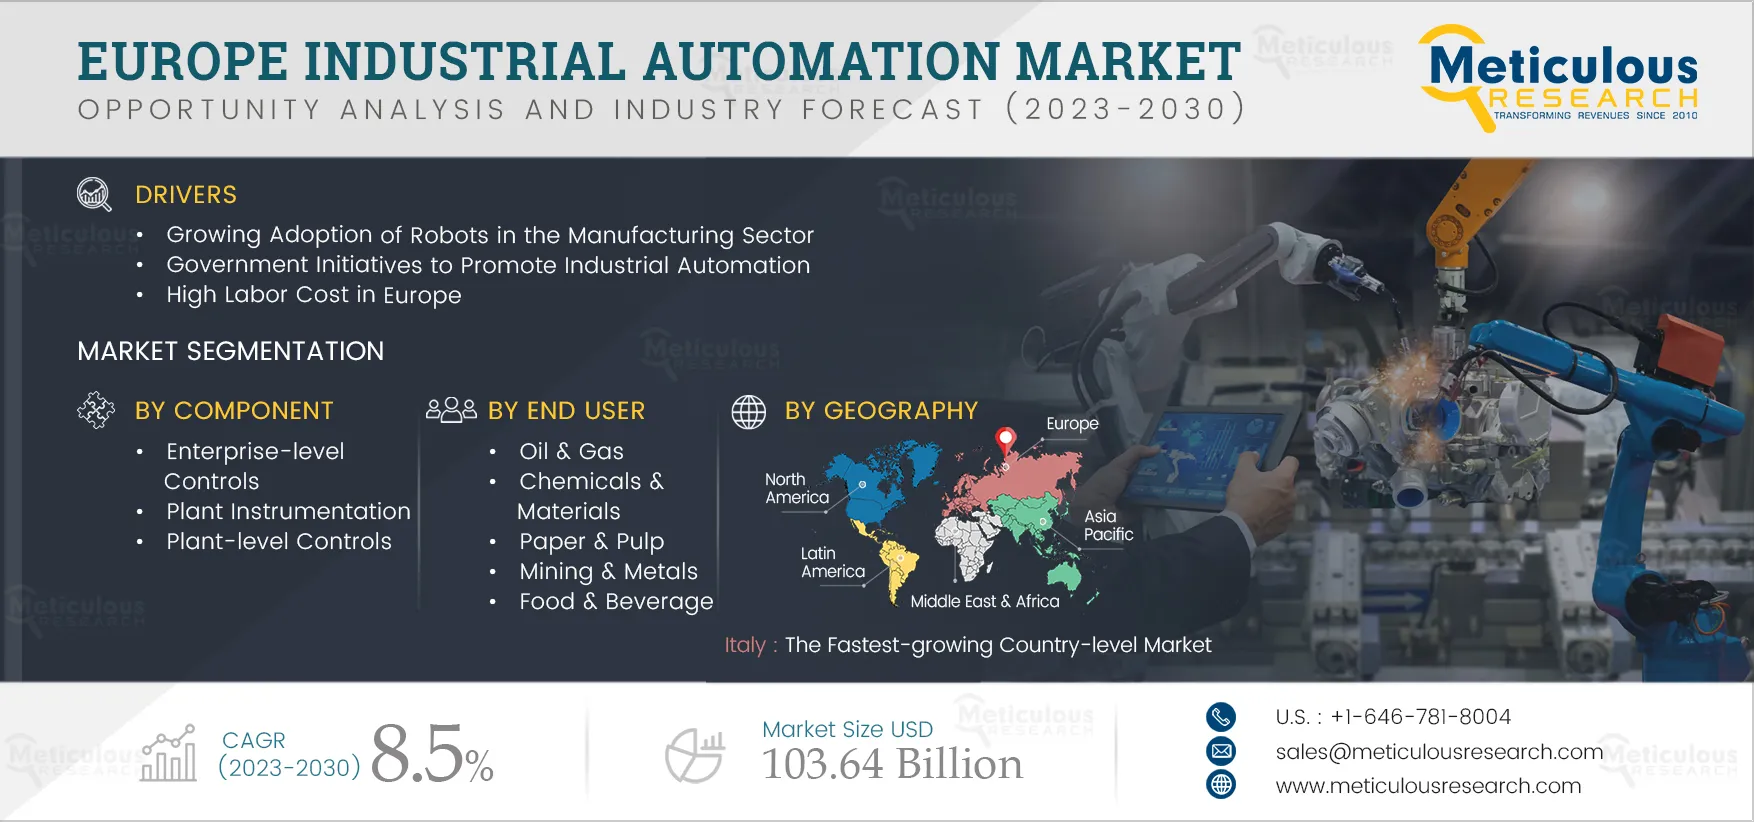 Europe Industrial Automation Market